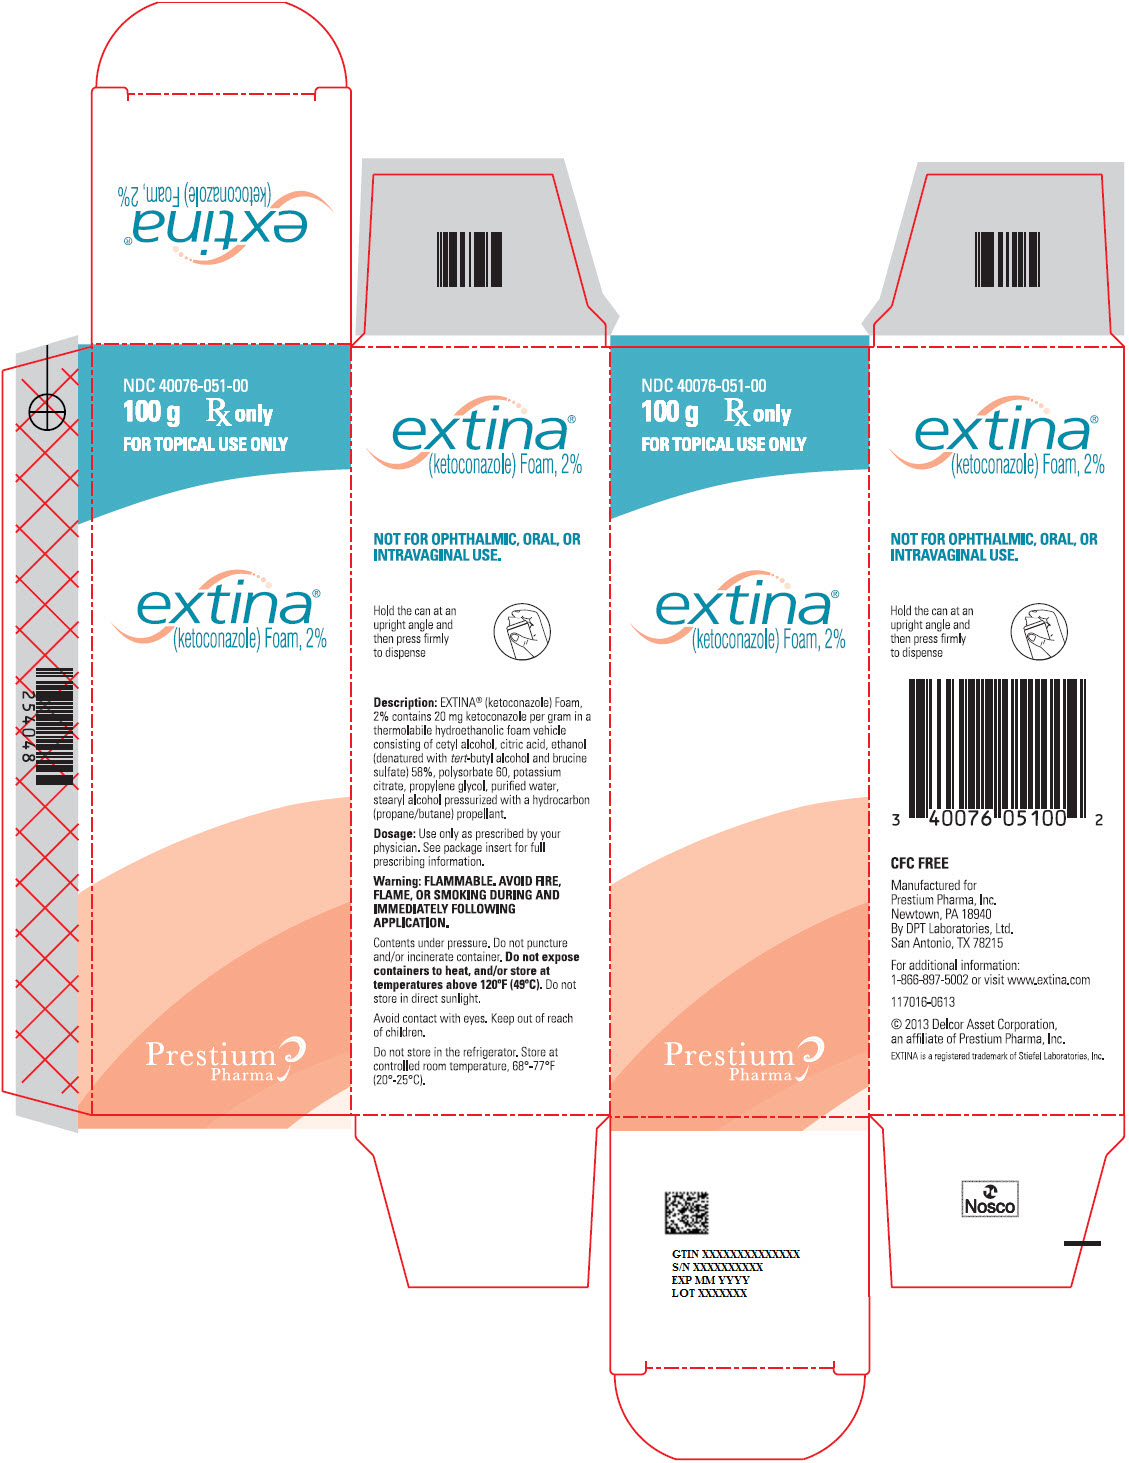 PRINCIPAL DISPLAY PANEL NDC 40076-051-00 100 g Rx only FOR TOPICAL USE ONLY extina® (ketoconazole) Foam, 2%